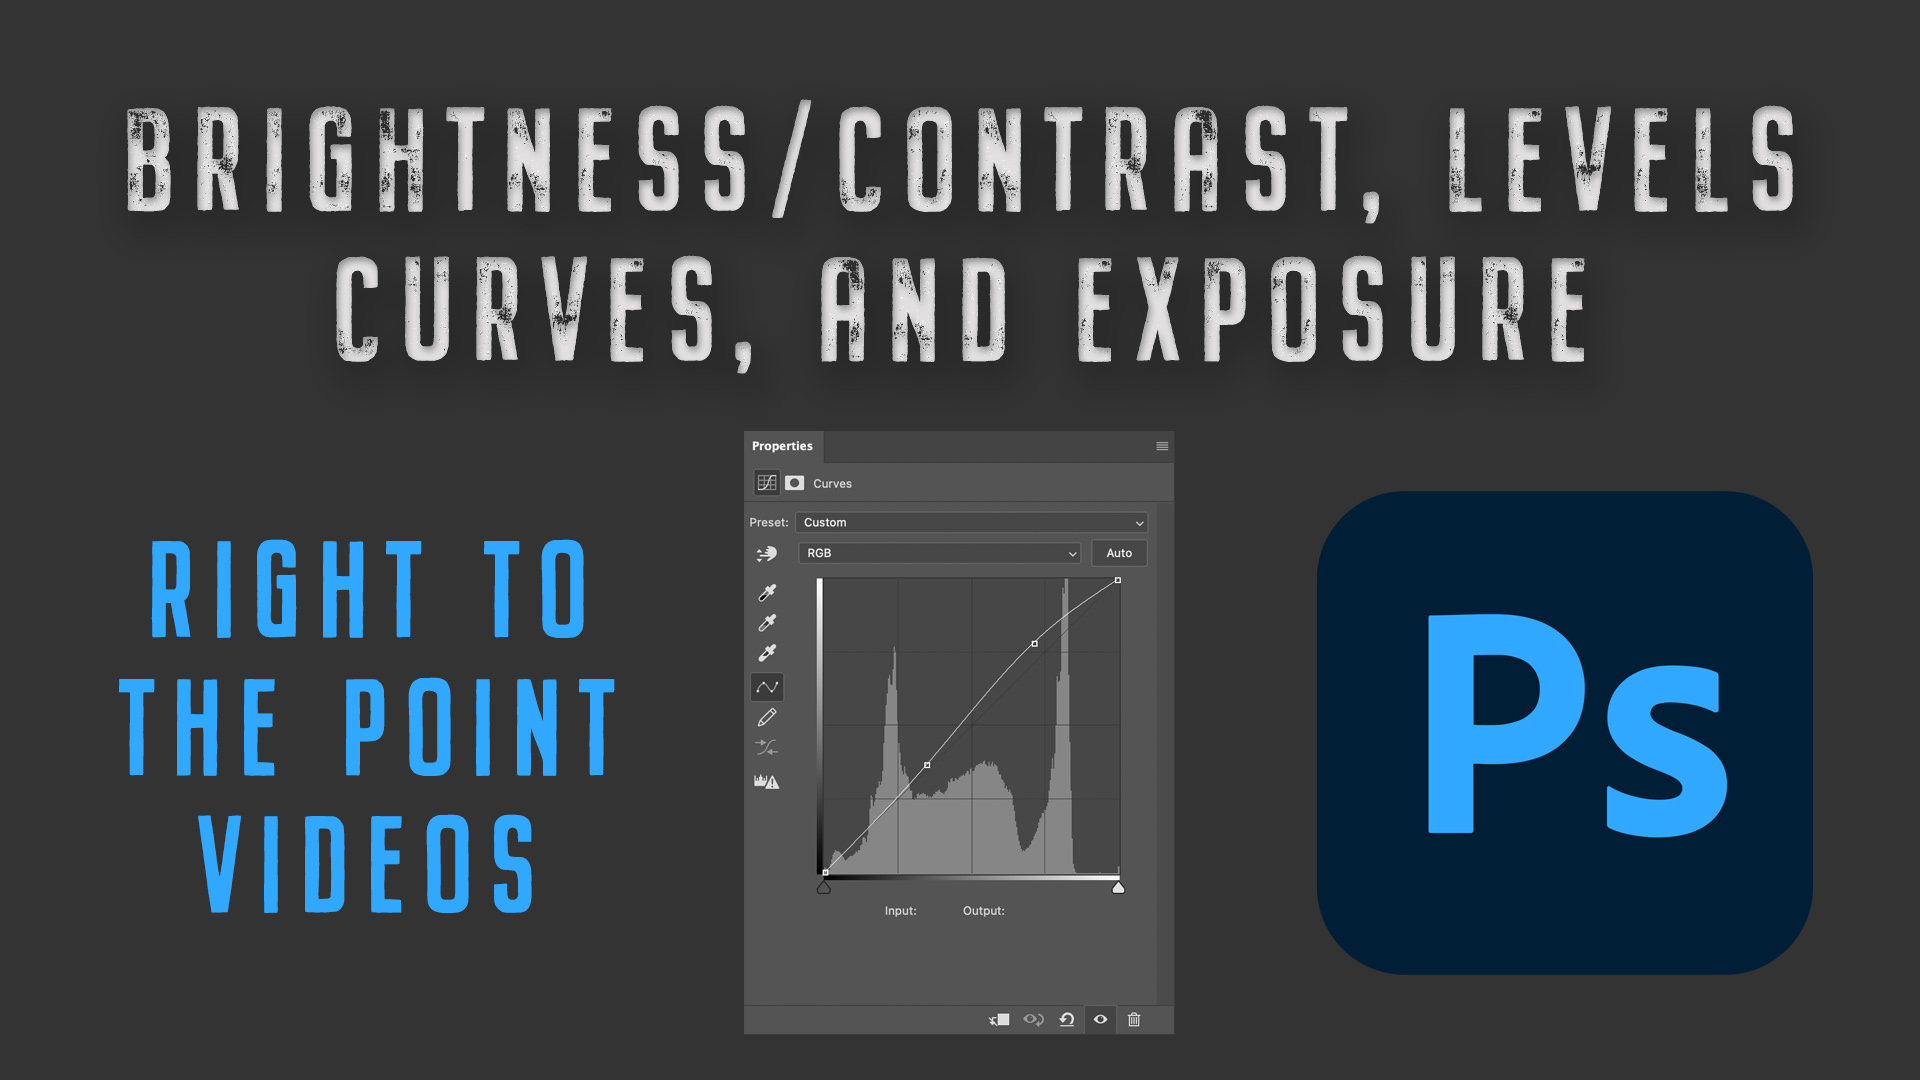 Right to the Point Photoshop Tutorial on Levels and Curves, Exposure and Brightness Contrast<span class="rmp-archive-results-widget rmp-archive-results-widget--not-rated"><i class=" rmp-icon rmp-icon--ratings rmp-icon--star "></i><i class=" rmp-icon rmp-icon--ratings rmp-icon--star "></i><i class=" rmp-icon rmp-icon--ratings rmp-icon--star "></i><i class=" rmp-icon rmp-icon--ratings rmp-icon--star "></i><i class=" rmp-icon rmp-icon--ratings rmp-icon--star "></i> <span>0 (0)</span></span>